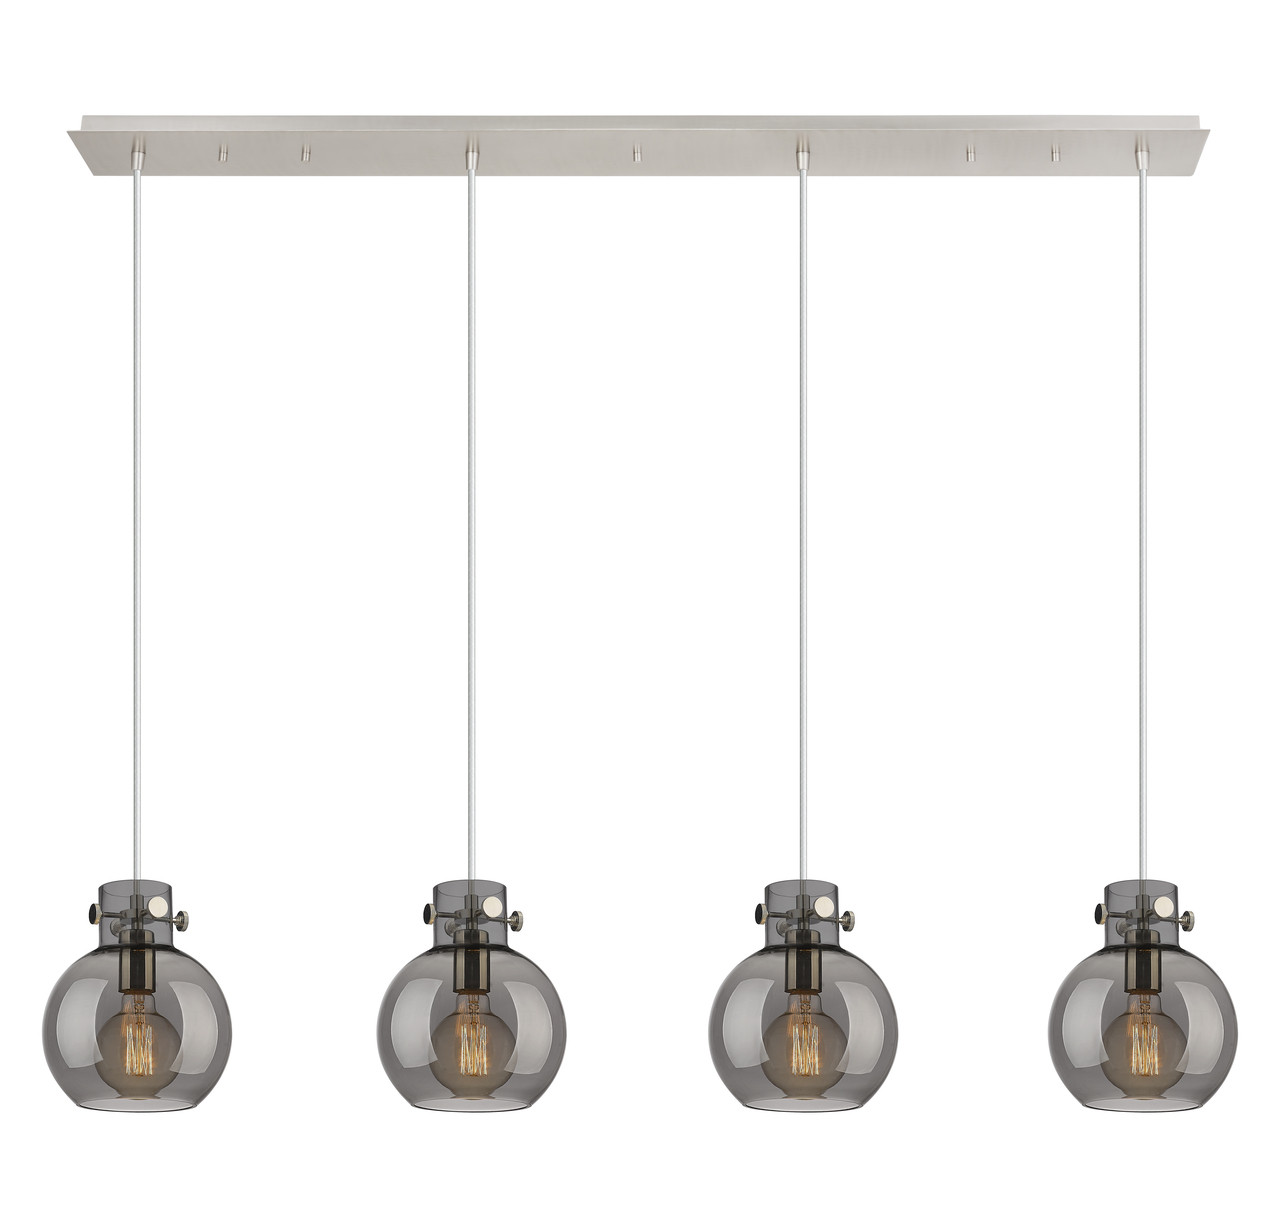 INNOVATIONS 124-410-1PS-PN-G410-8SM Newton Sphere 0 Light 52 inch Linear Pendant Polished Nickel